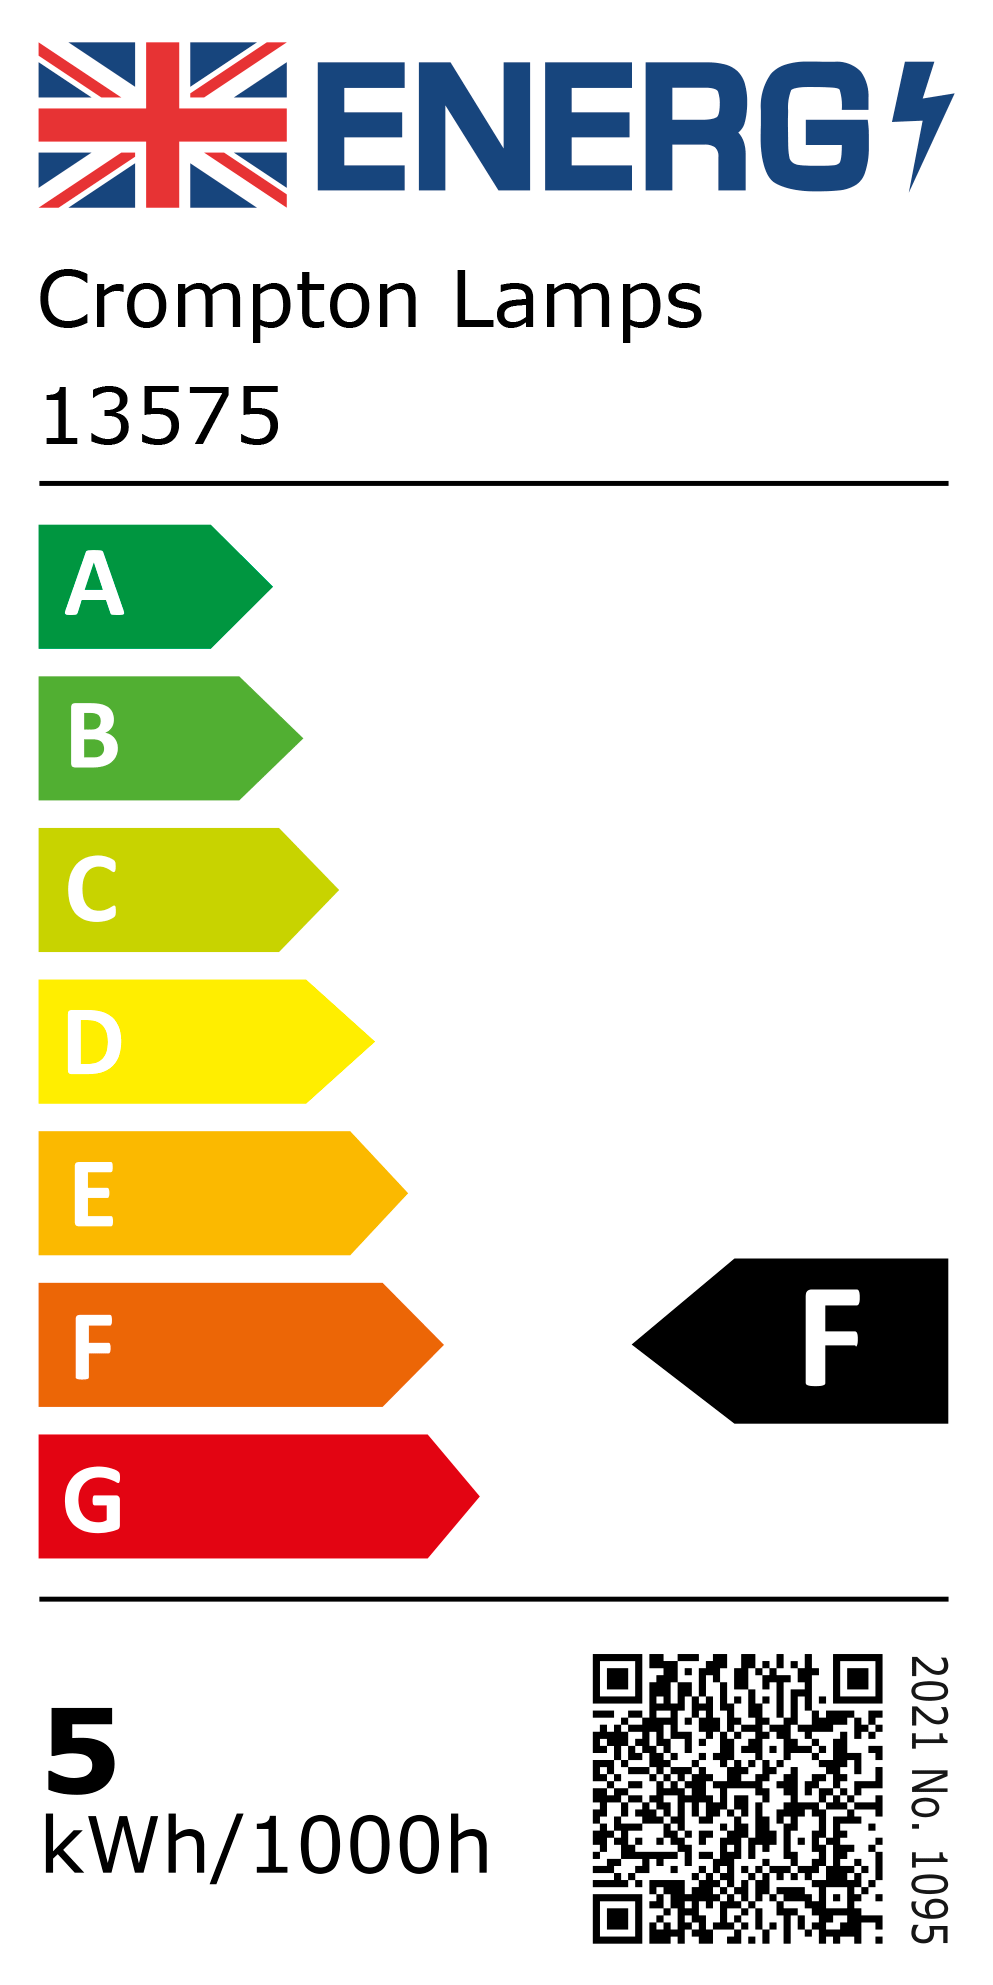 New 2021 Energy Rating Label: Stock Code 13575